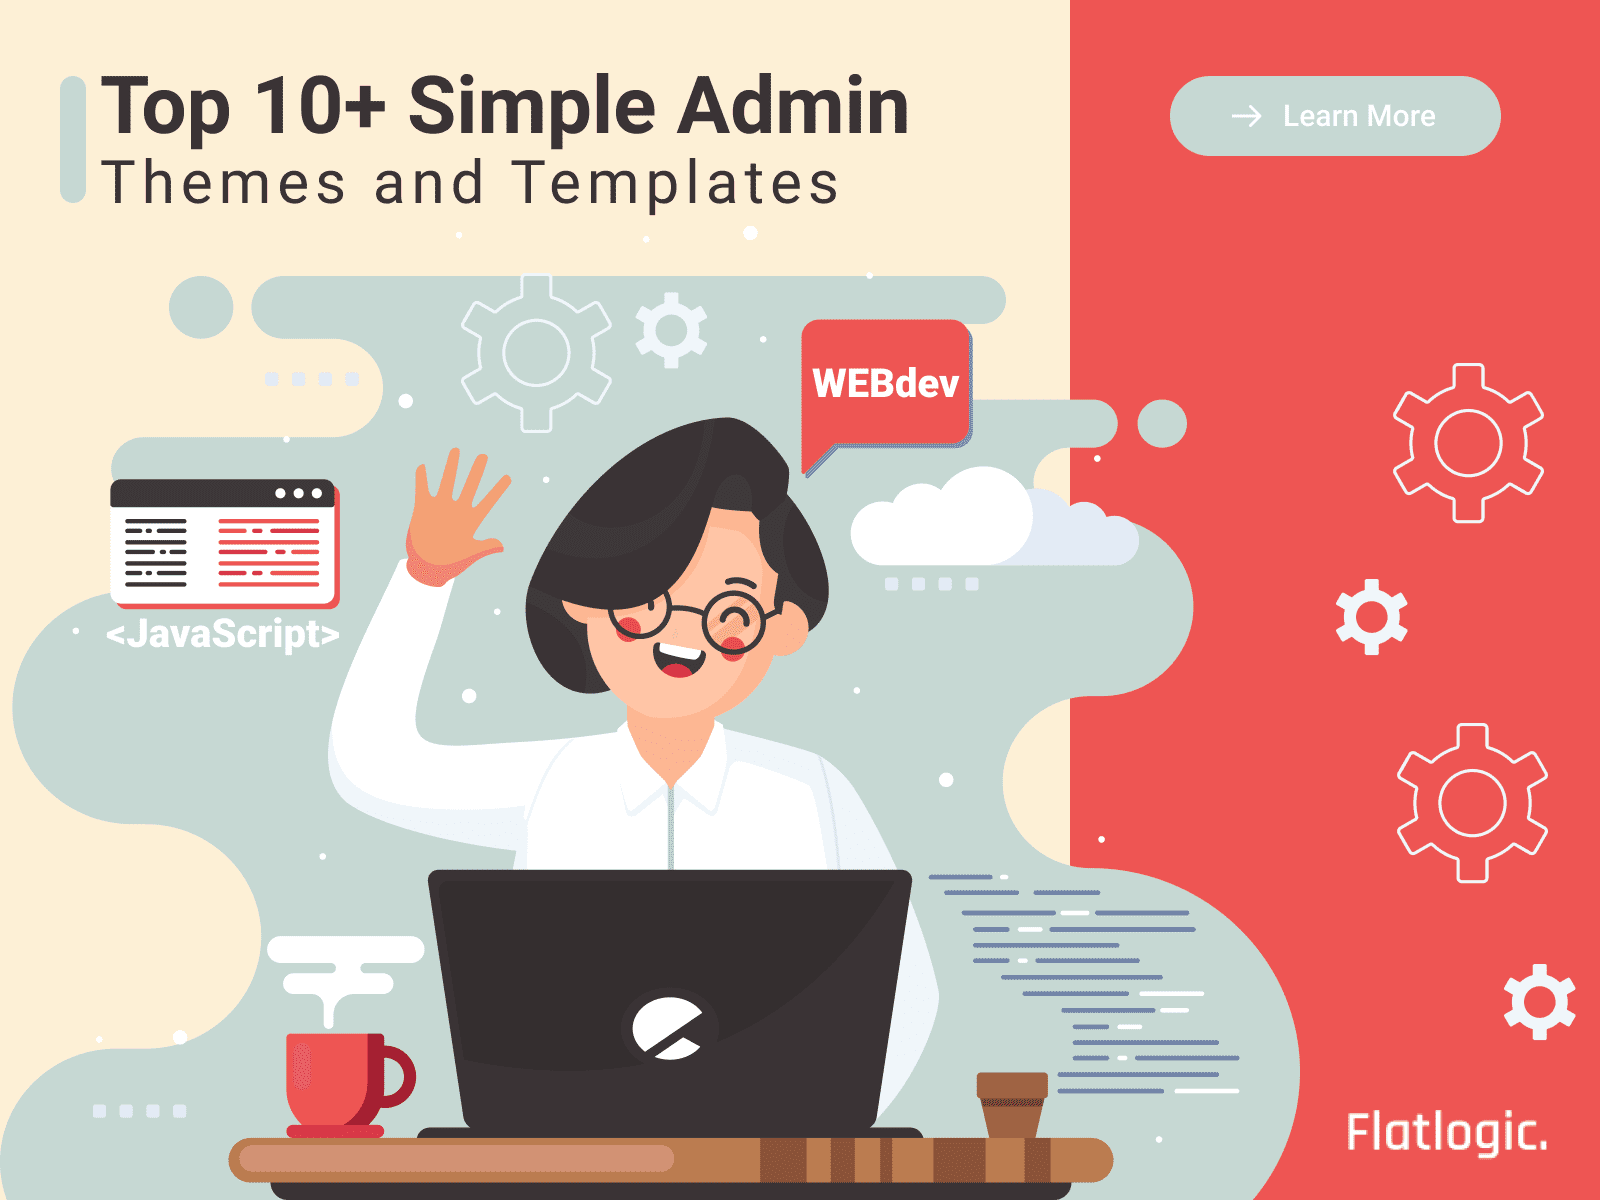 Top 10+ Simple Admin Themes and Templates